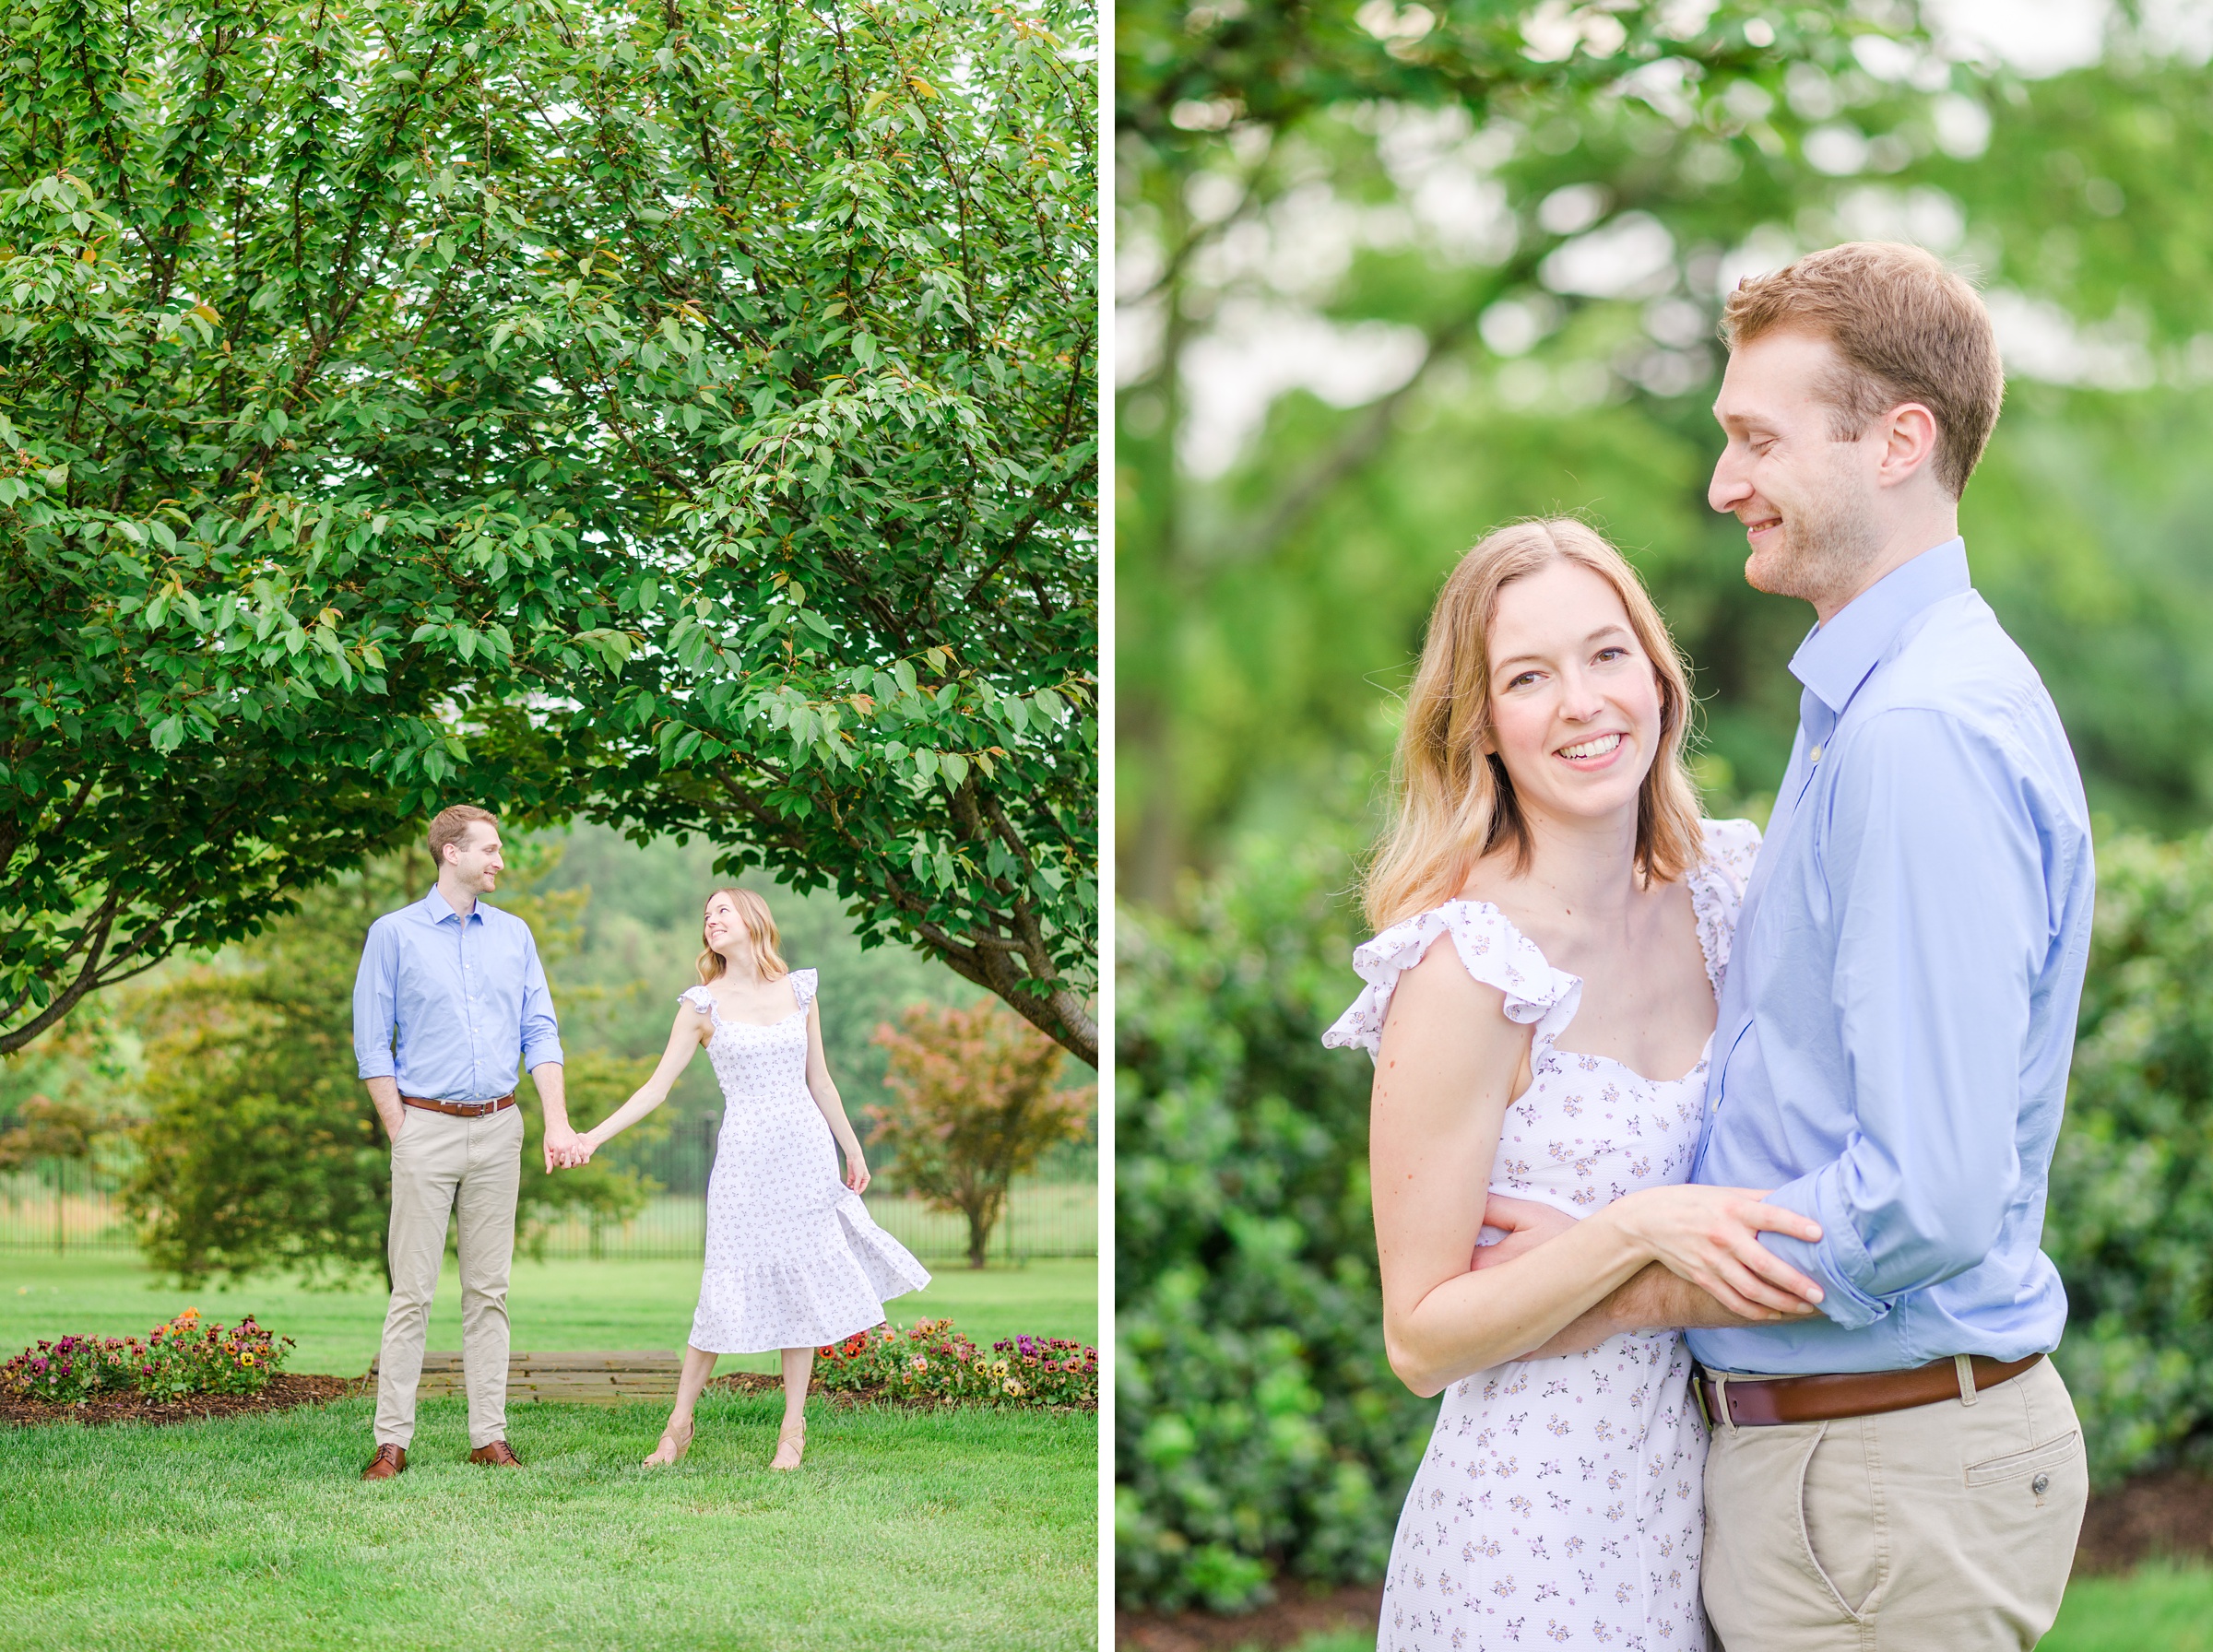 Engaged Couple smiles in the garden at Belmont Manor during a rainy sunset engagement photographed by Baltimore Wedding Photographer Cait Kramer